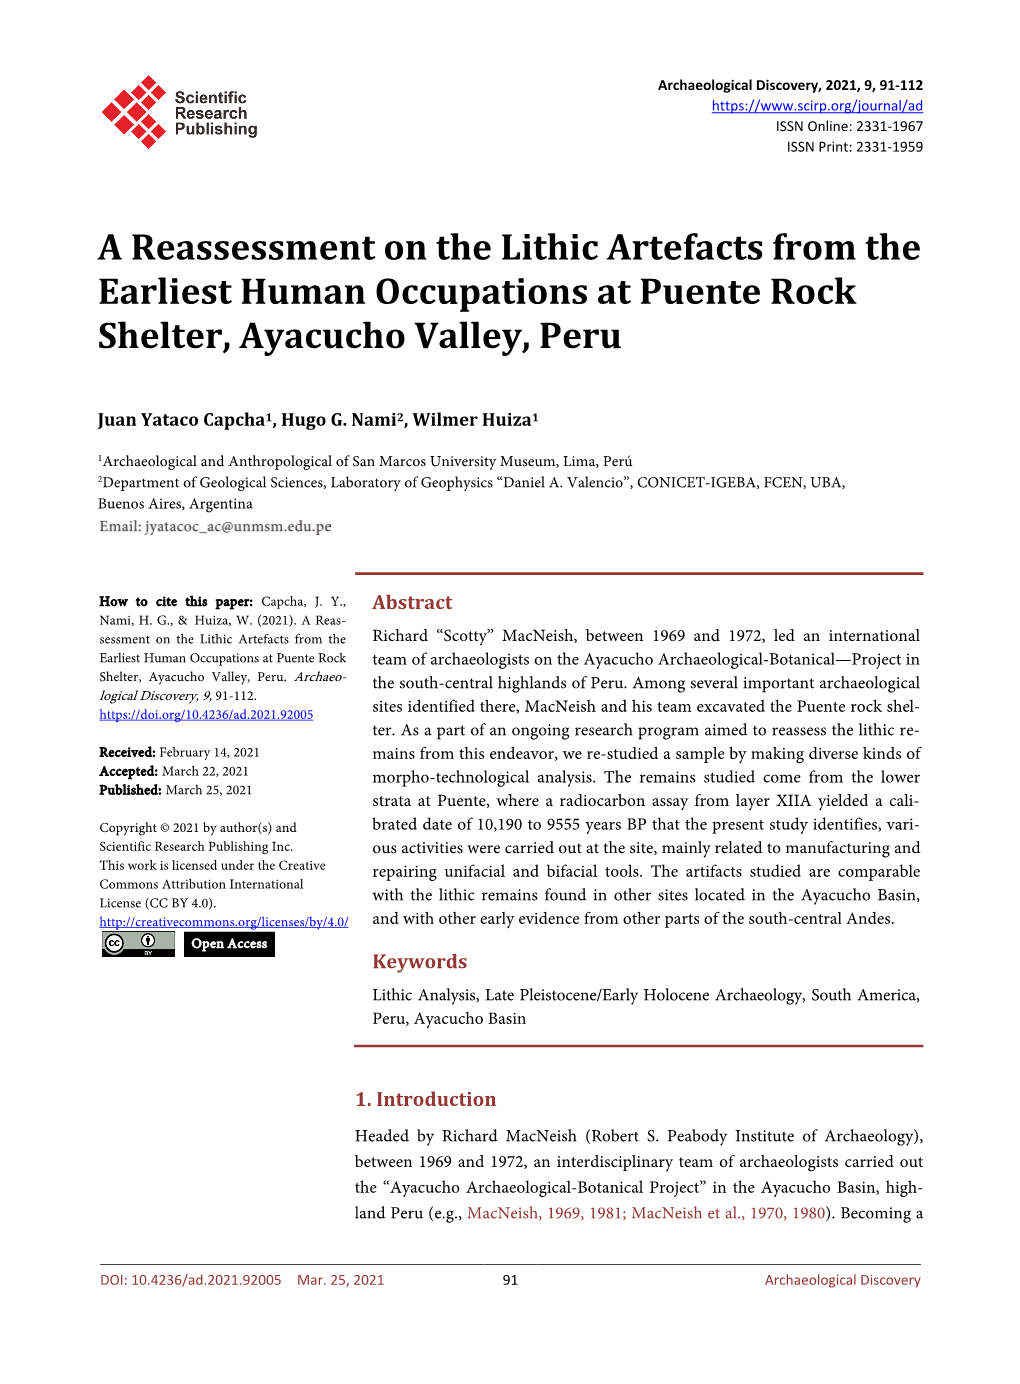 A Reassessment on the Lithic Artefacts from the Earliest Human Occupations at Puente Rock Shelter, Ayacucho Valley, Peru